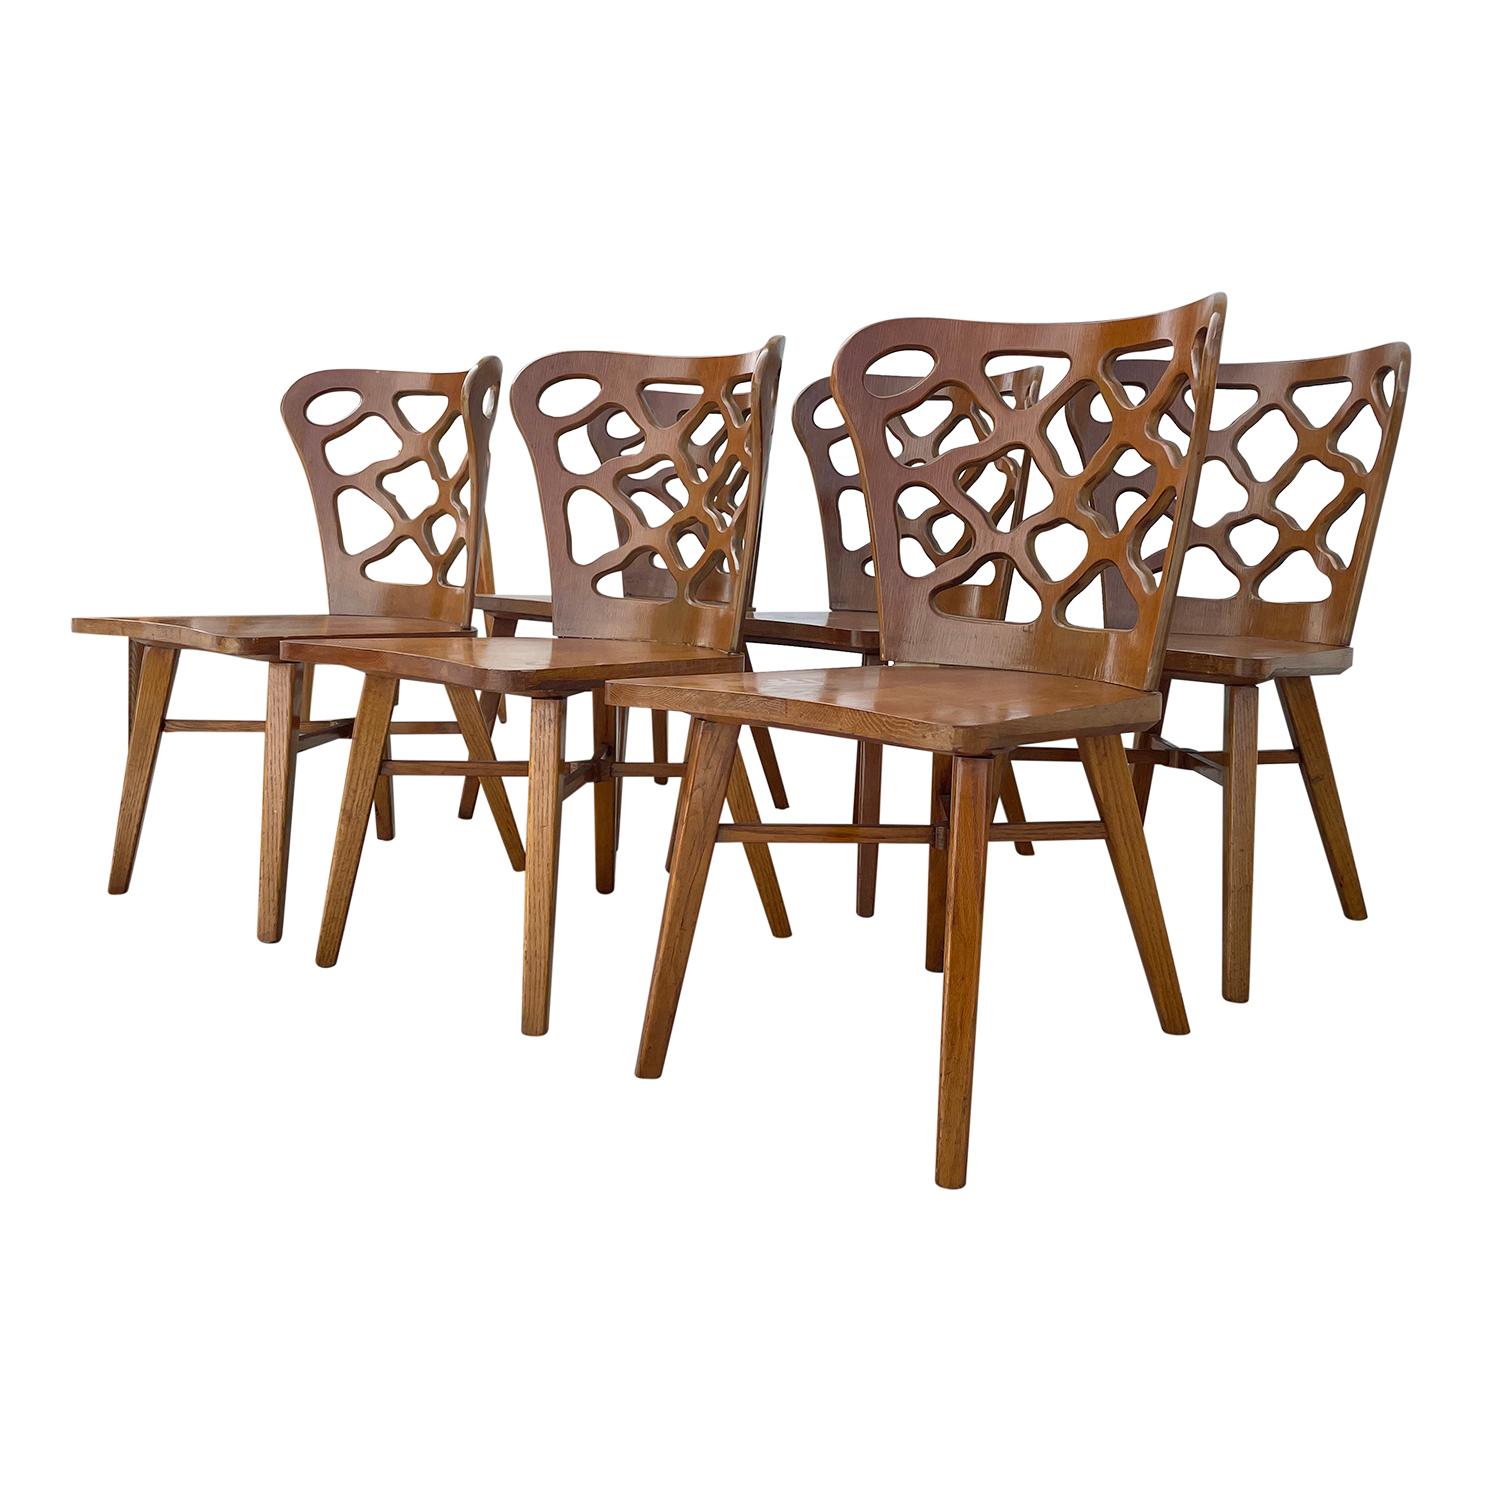 Hand-Carved 20th Century American Set of Six Oakwood, Bent Plywood Dining Chairs by RomWeber